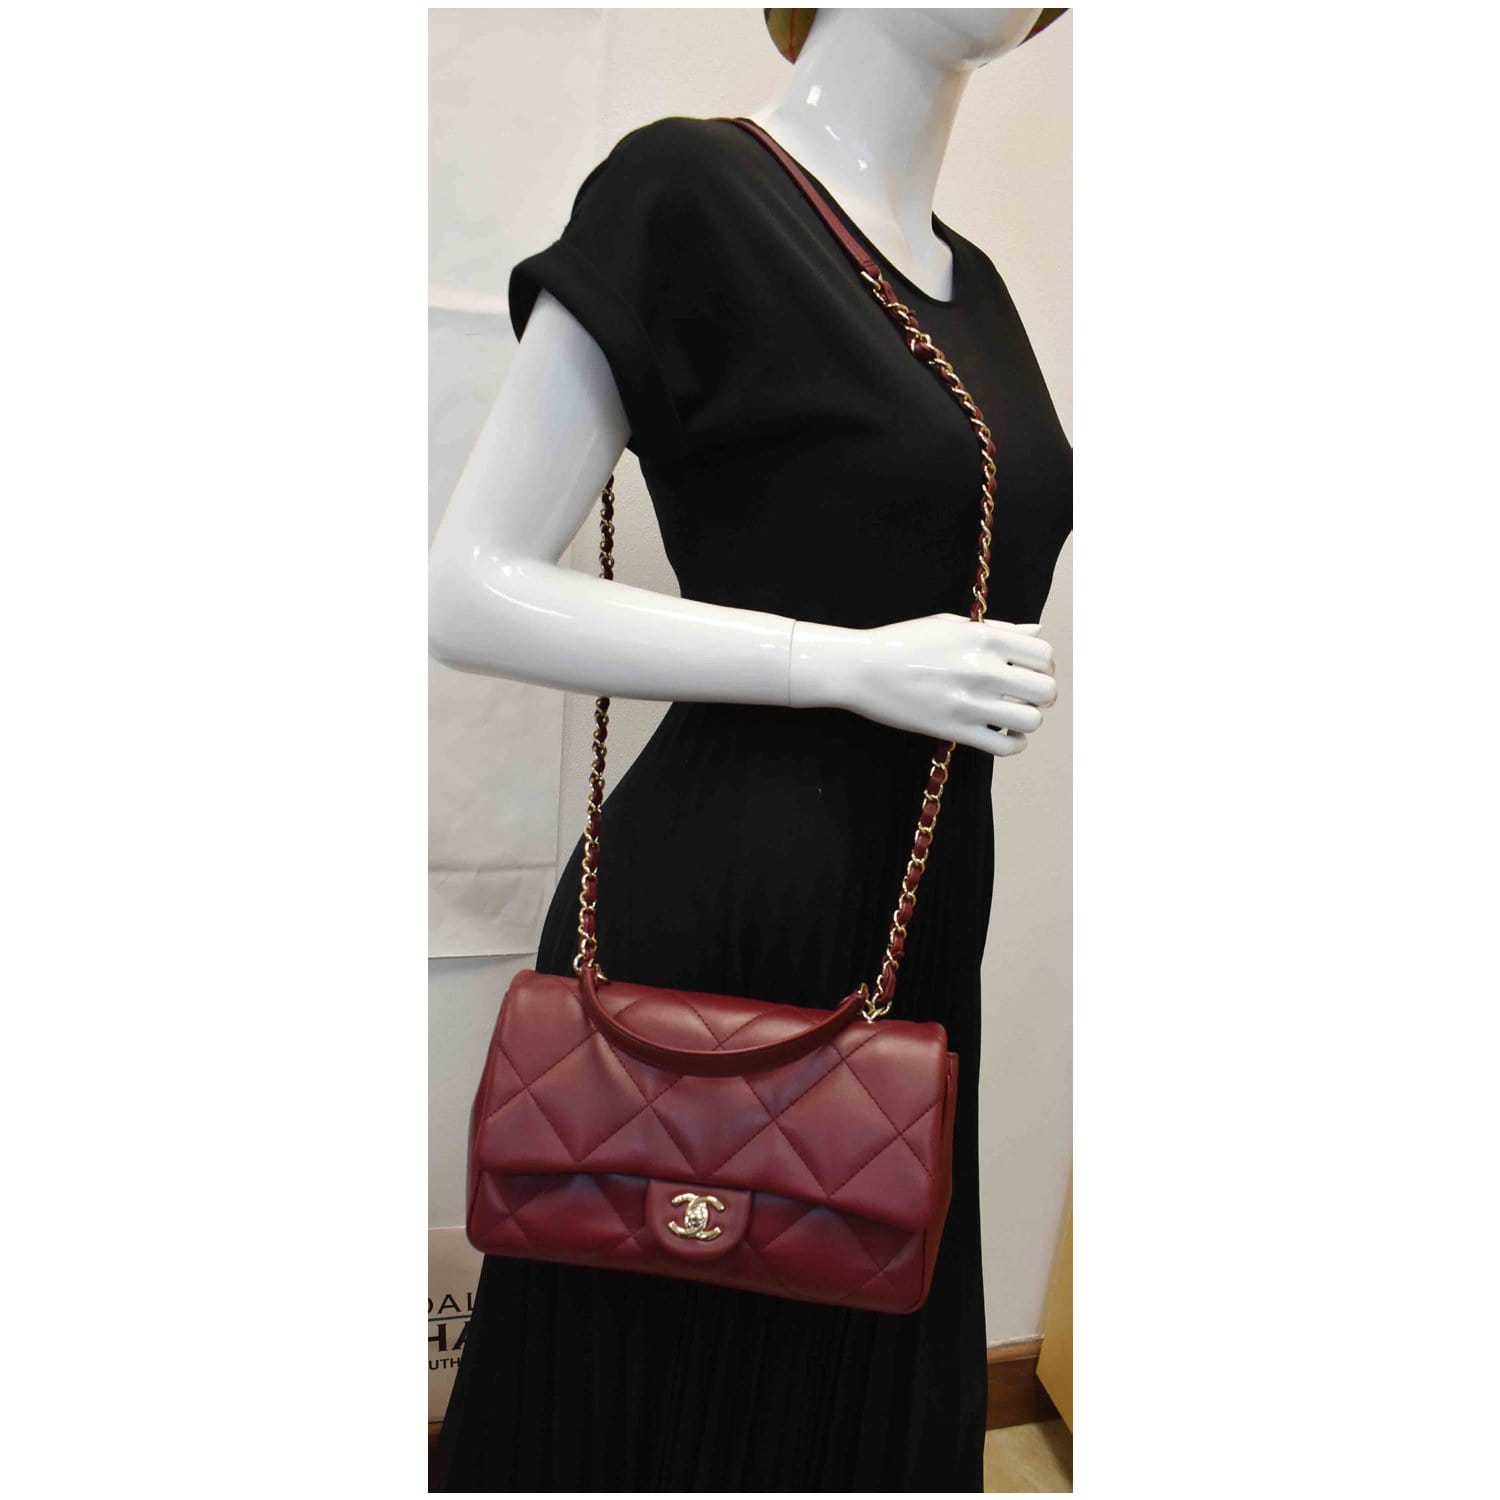 Chanel Quilted Lambskin Leather Mini Flap Burgundy Crossbody Shoulder Bag